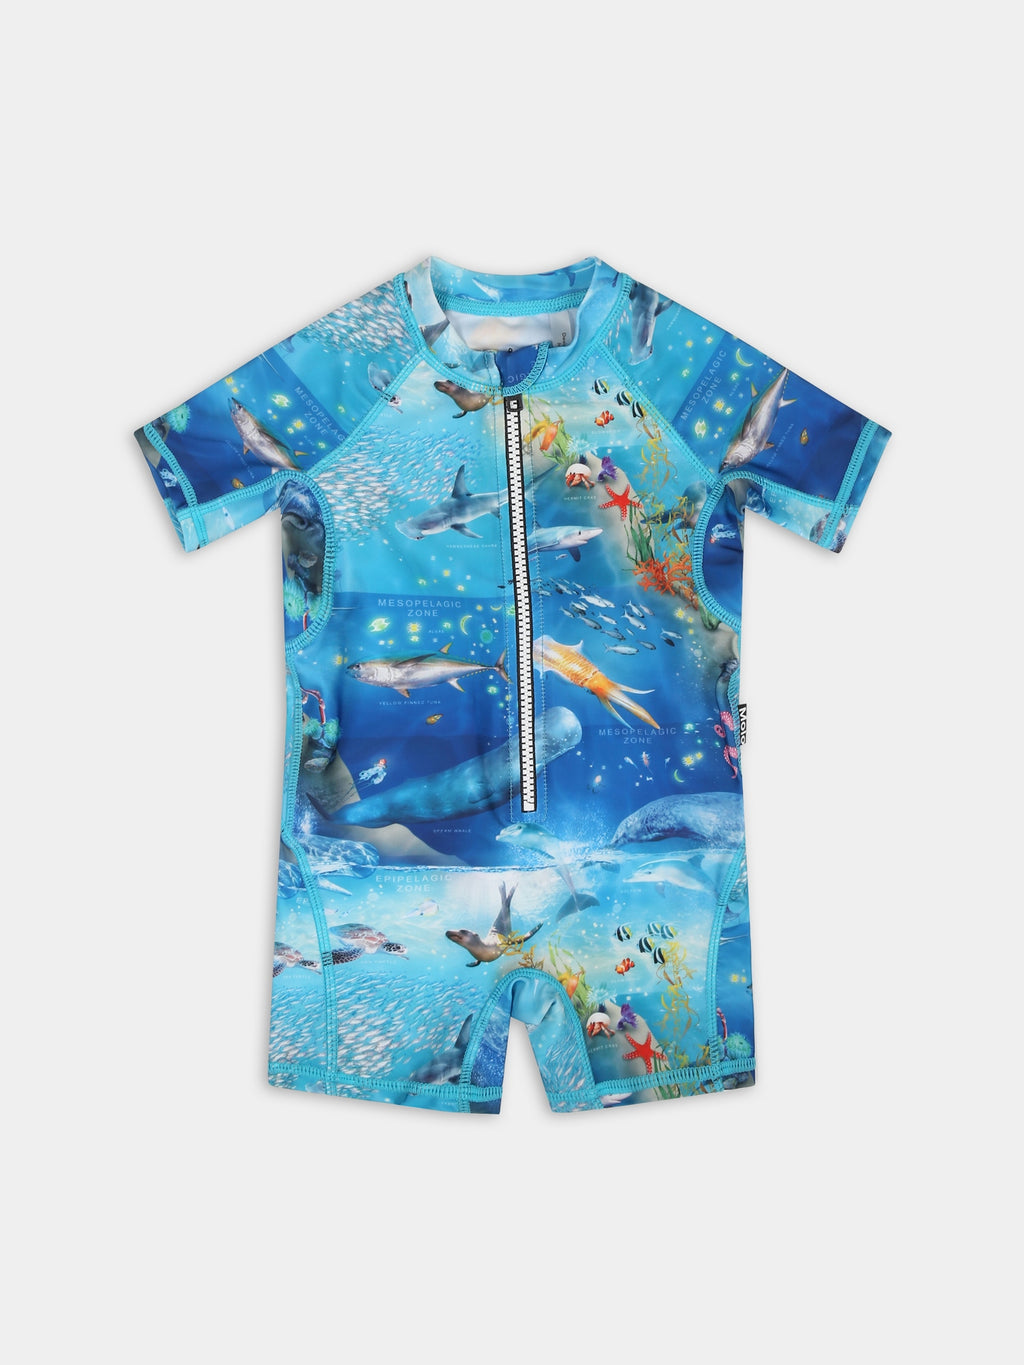 Light blue swimsuit for baby boy with marine animals